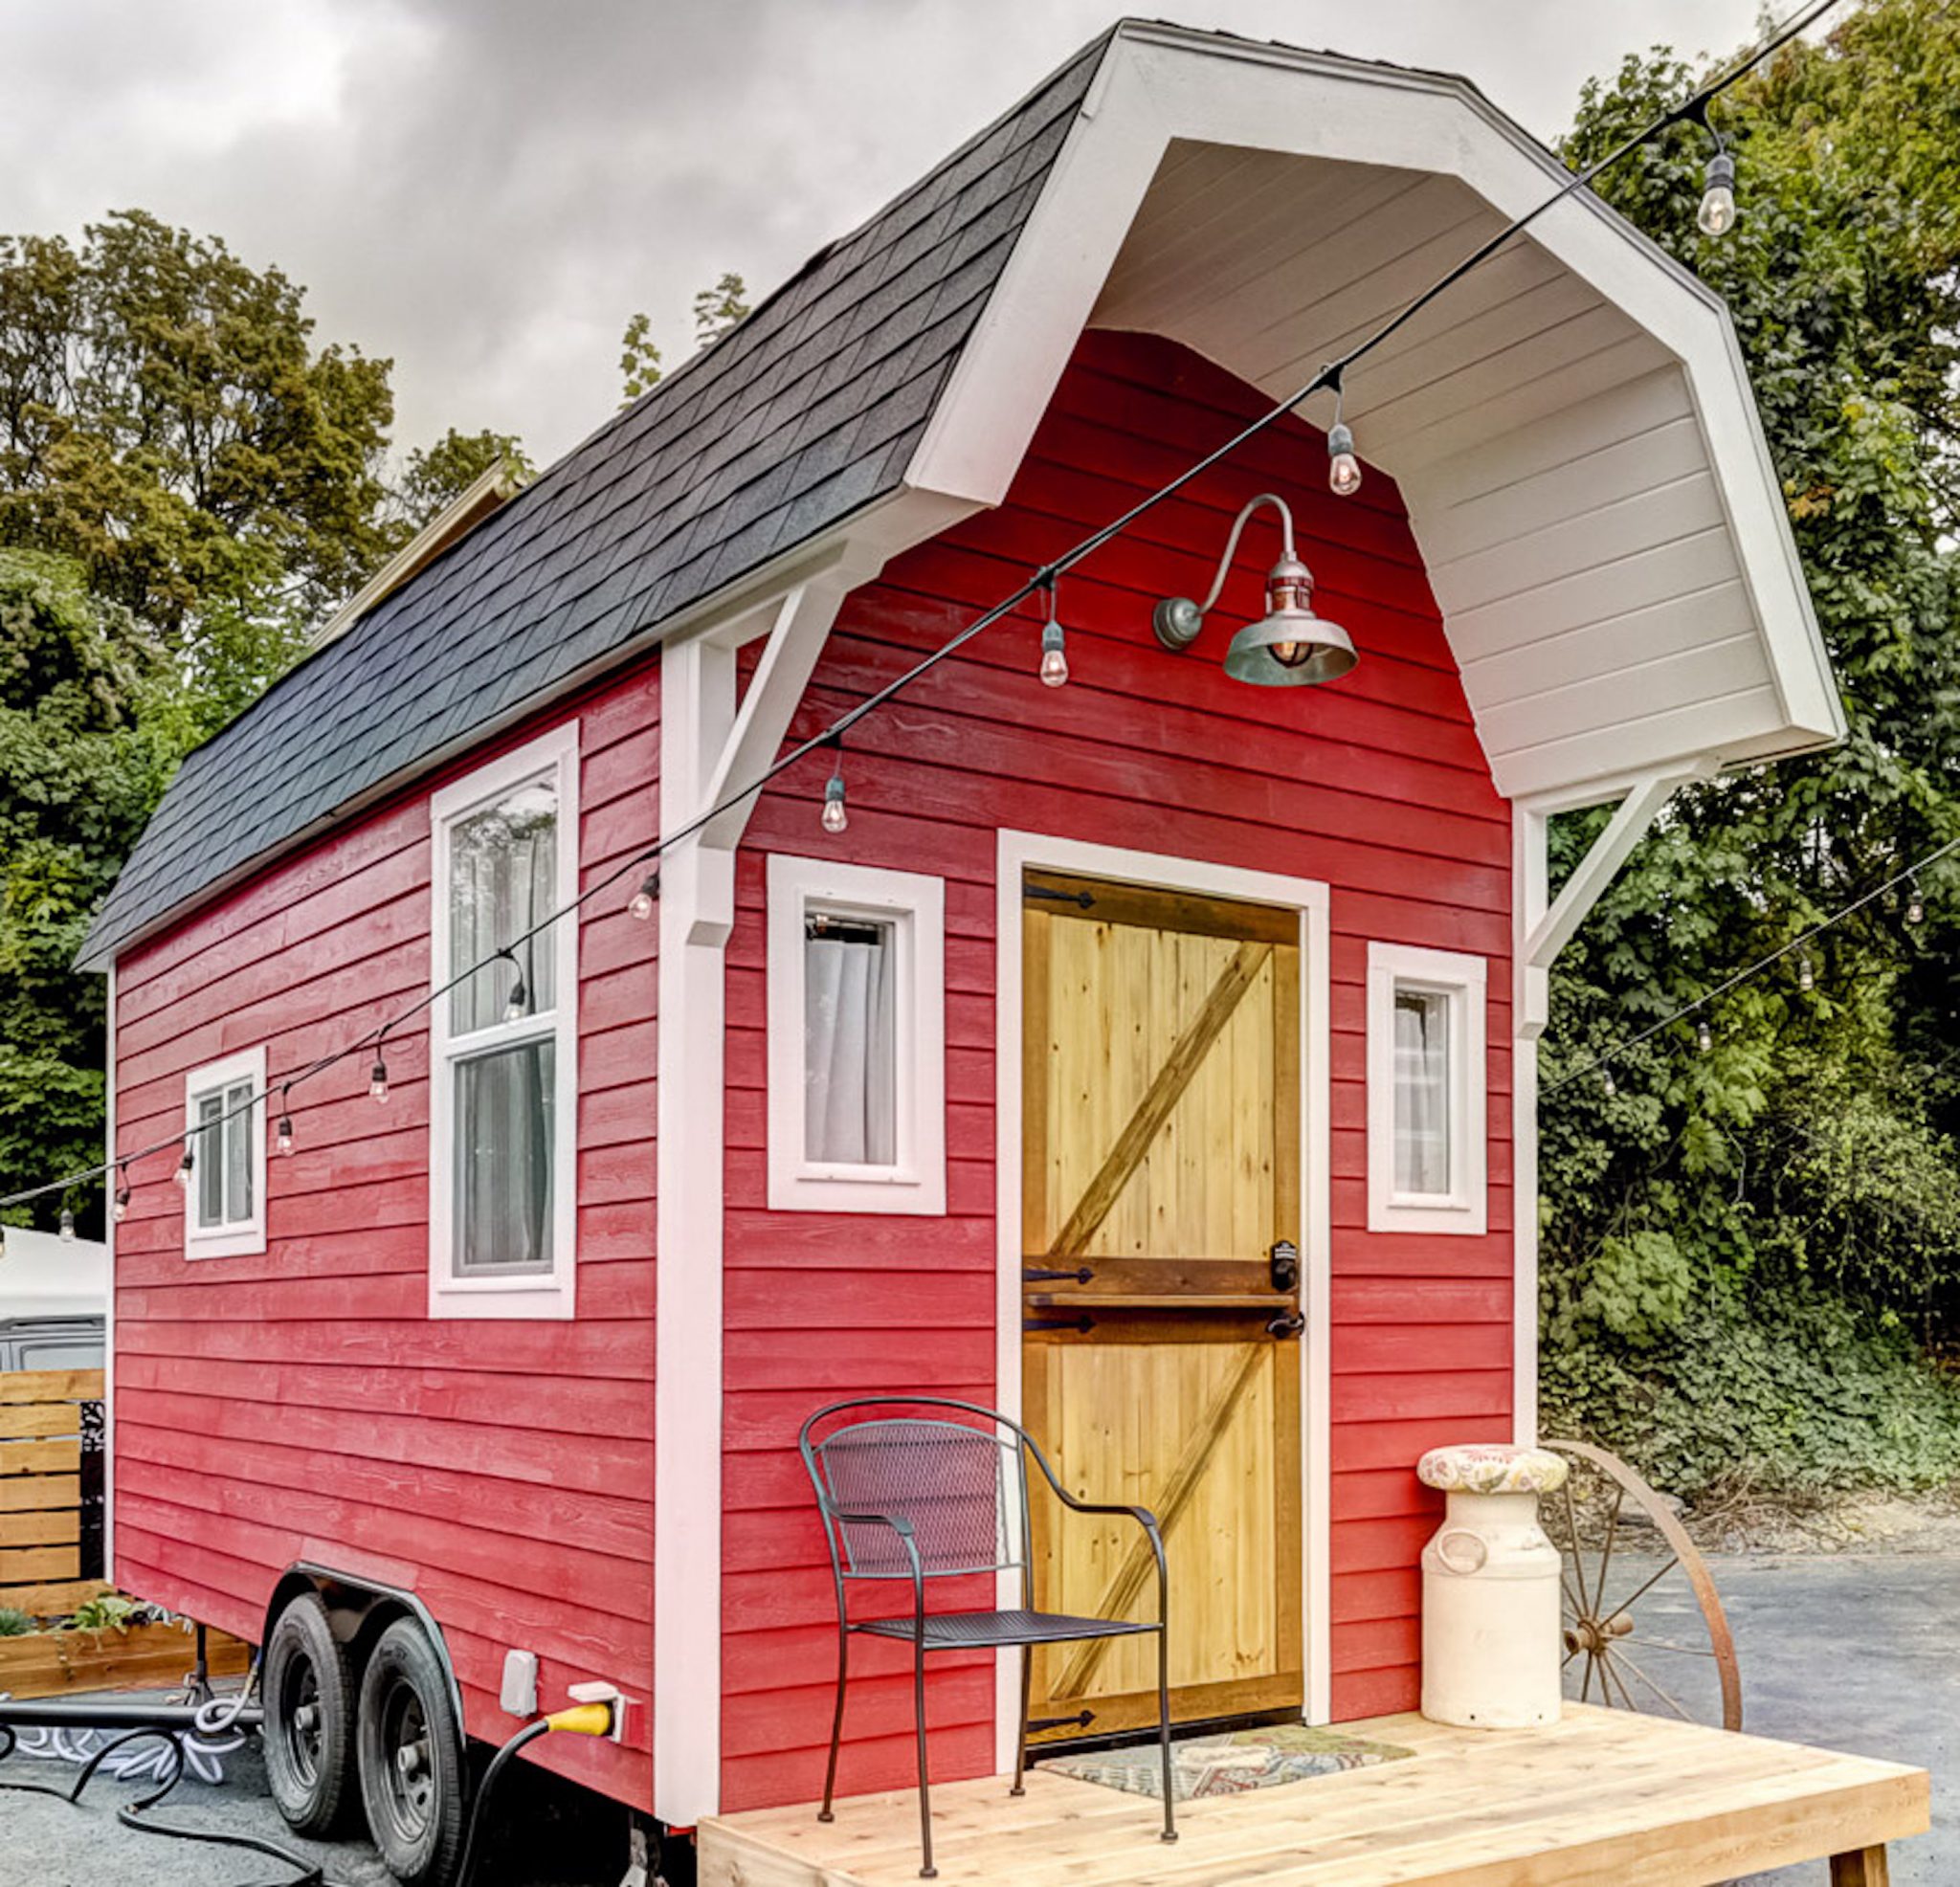 8 Small Beautiful Houses On Wheels You Can Stay In Tiny Travel Chick